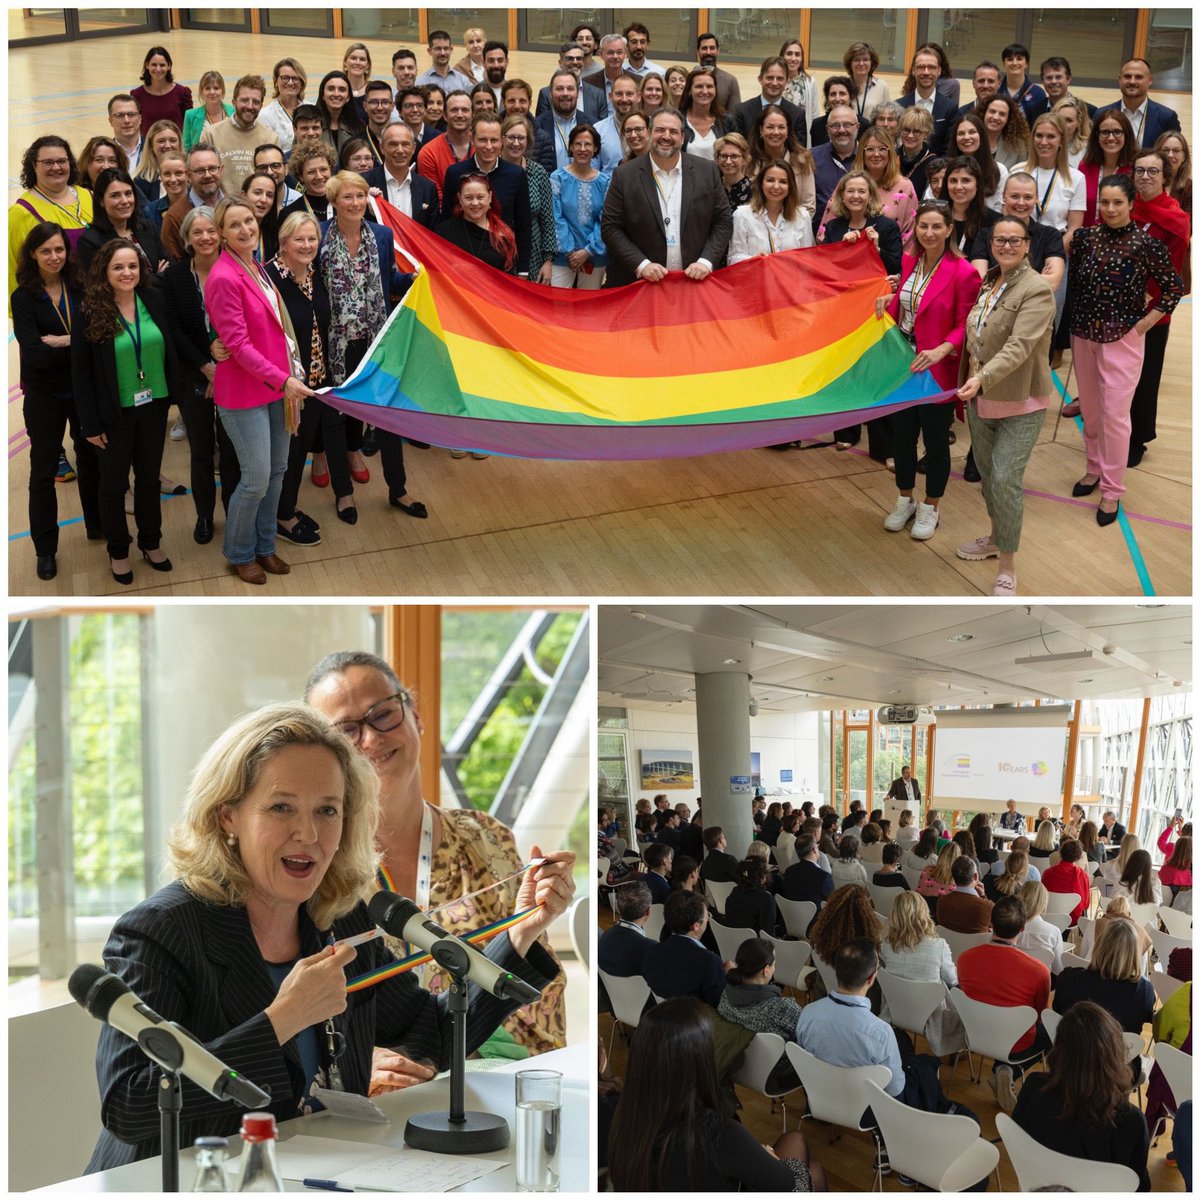 🇪🇺🏳️‍🌈 Ahead of #IDAHOT tomorrow, I was happy to celebrate with colleagues the 10 years of EIB Proud, the @EIB Group LGBTIQ+ staff and allies network. #HumanRights #Values